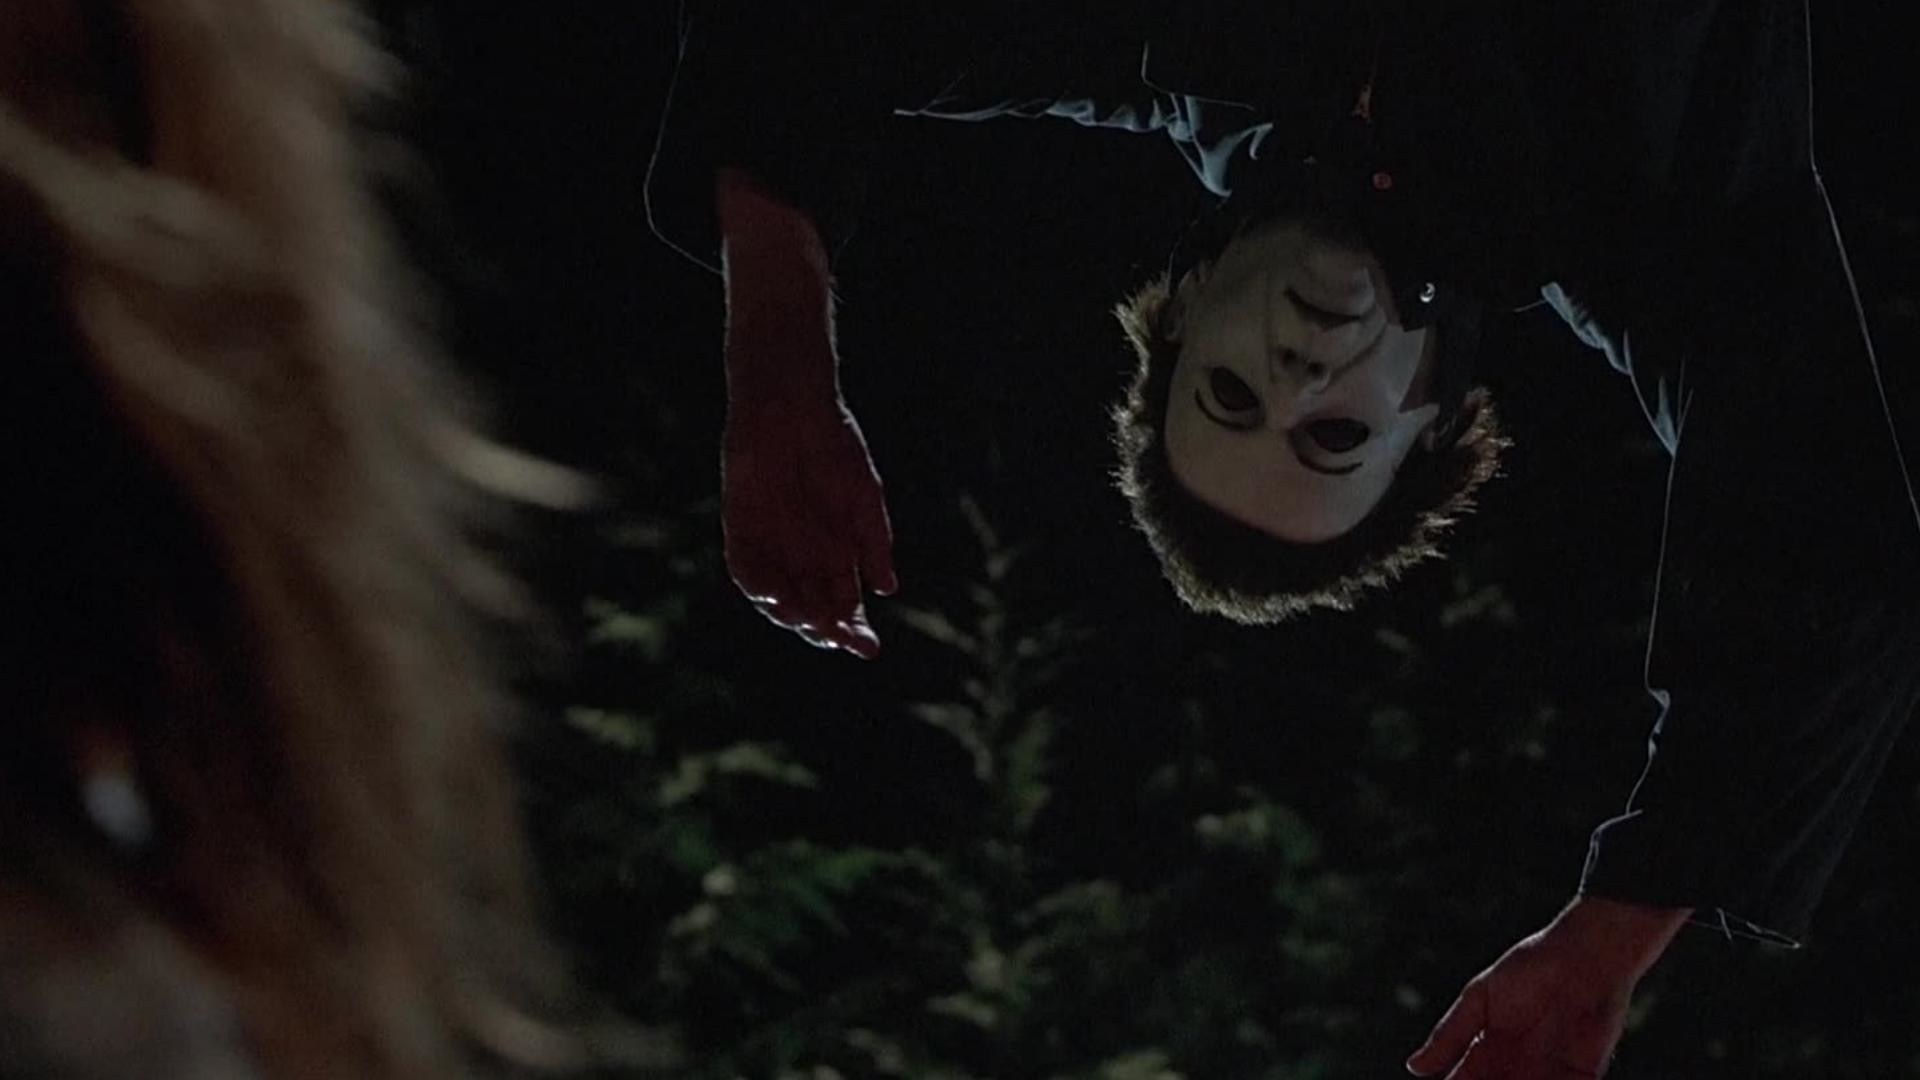 1920x1080 "Yes, I'm hanging upside down like an idiot but at this point “